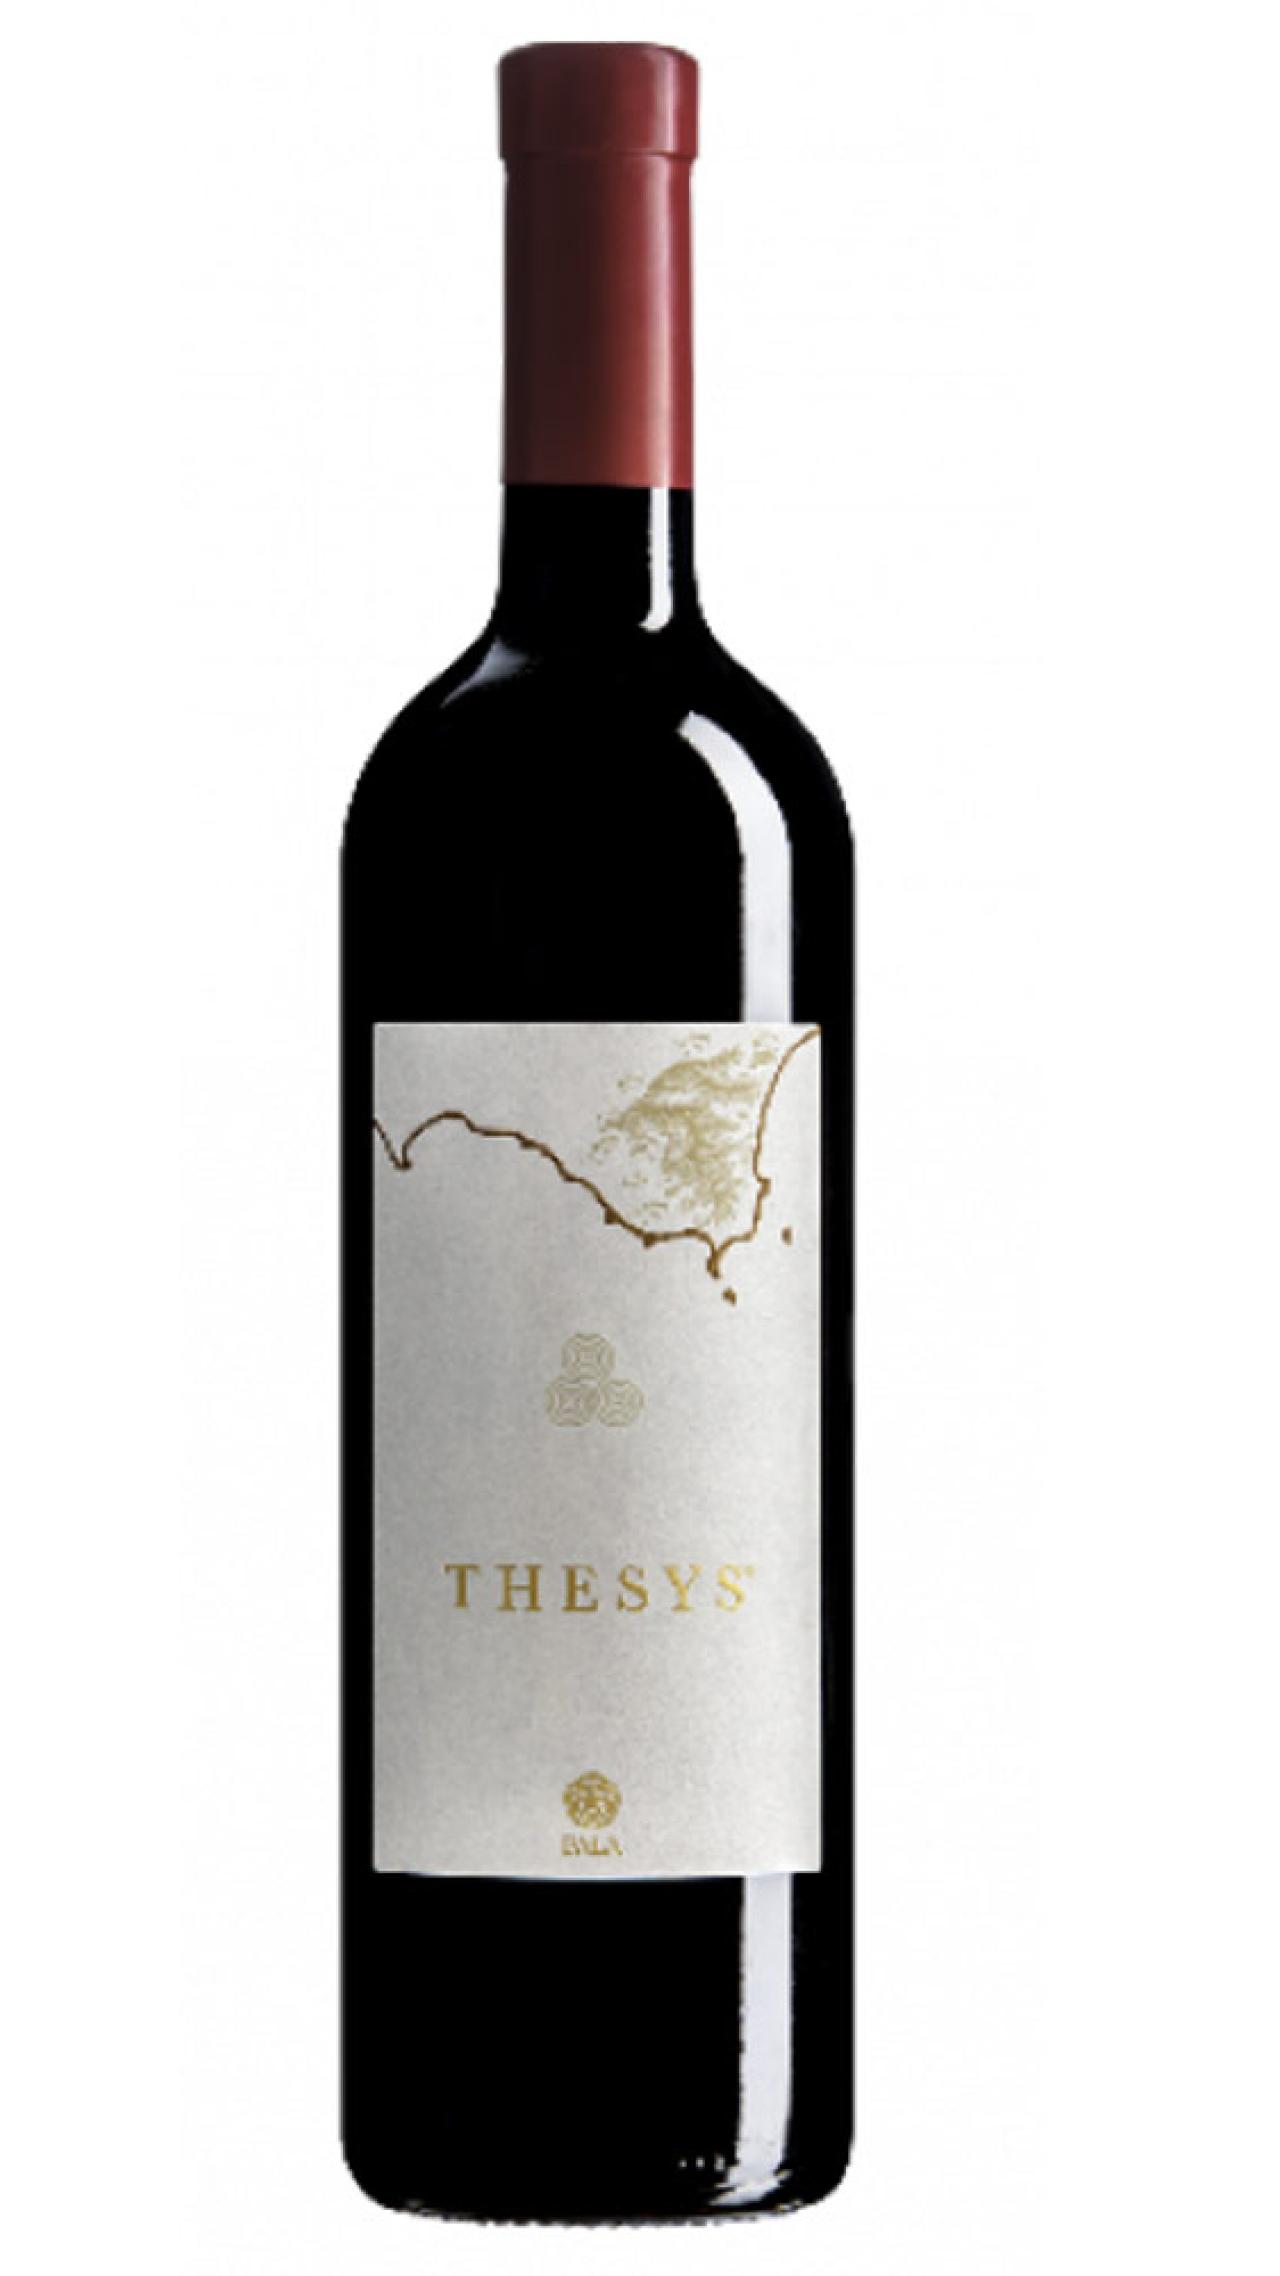 Thesys Isola dei Nuraghi IGT Rosso 2015